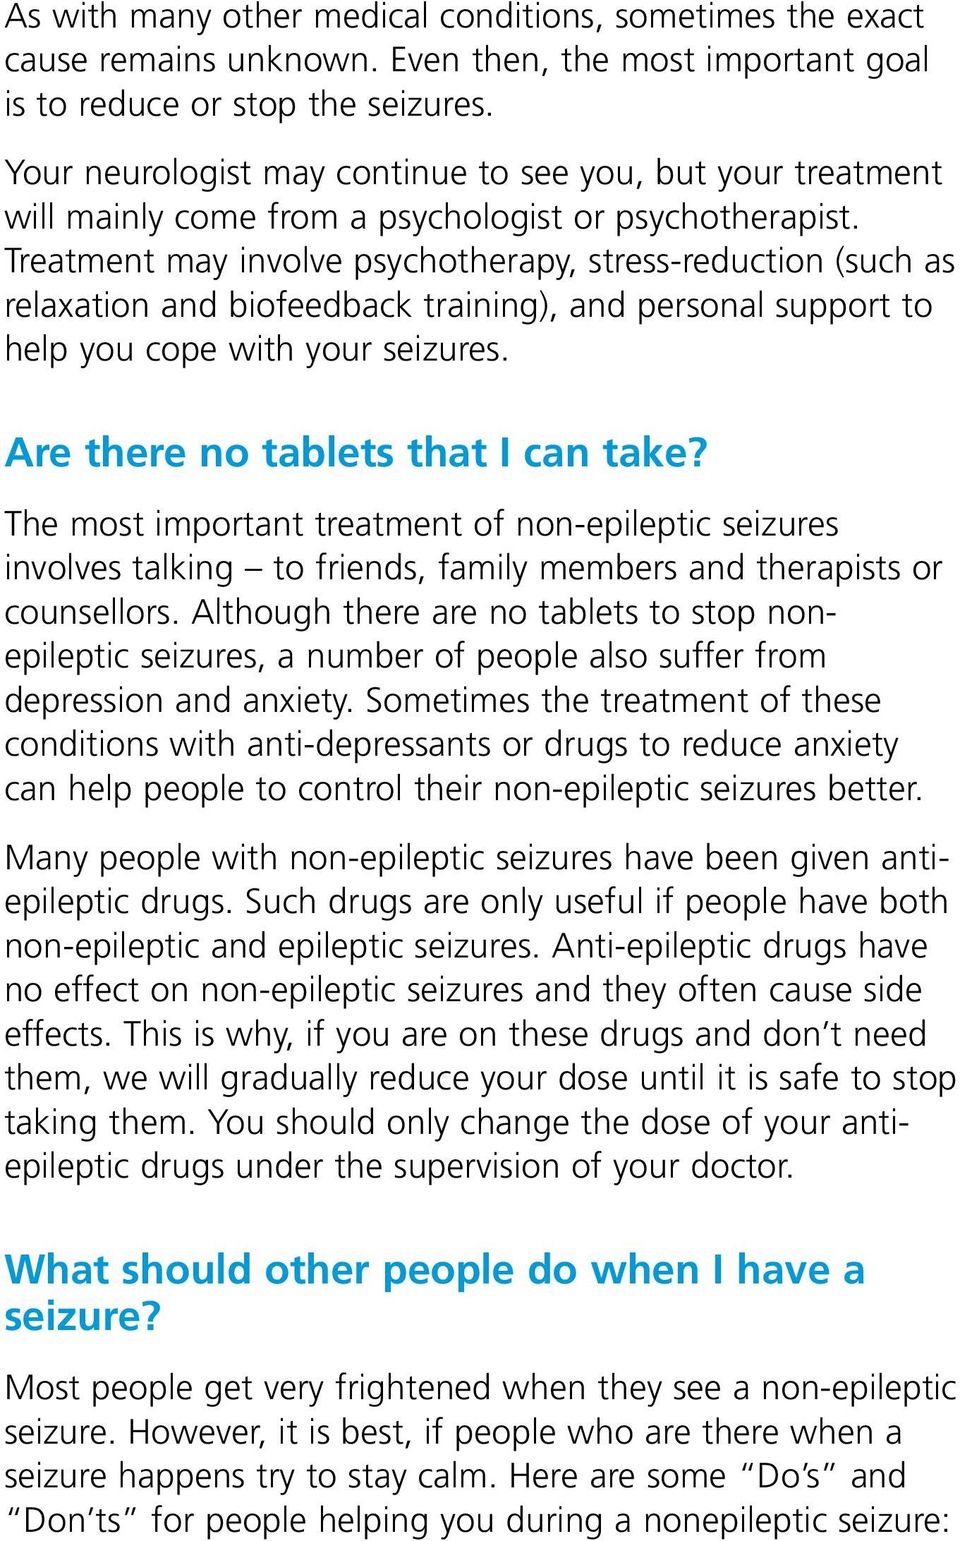 Treatment may involve psychotherapy, stress-reduction (such as relaxation and biofeedback training), and personal support to help you cope with your seizures. Are there no tablets that I can take?